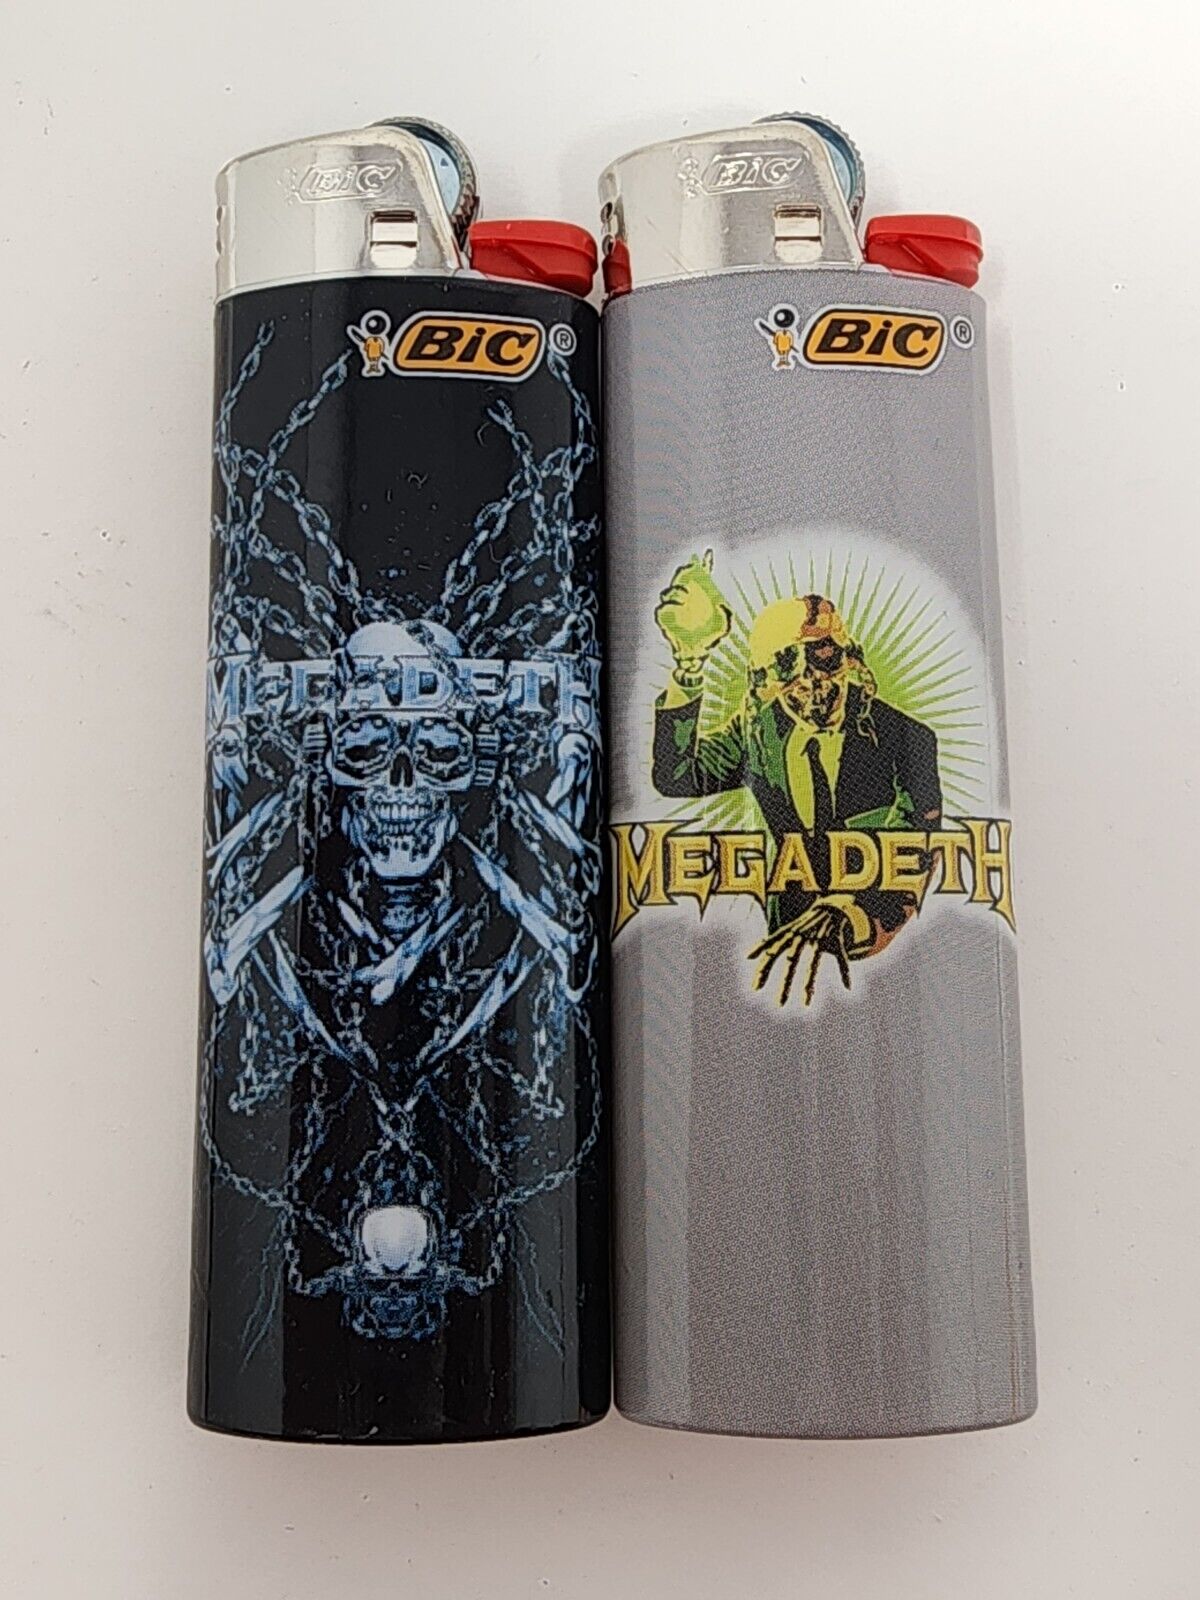 Megadeath Bic Full Sized Lighters- 2 Designs Rock Band Royalty Collection